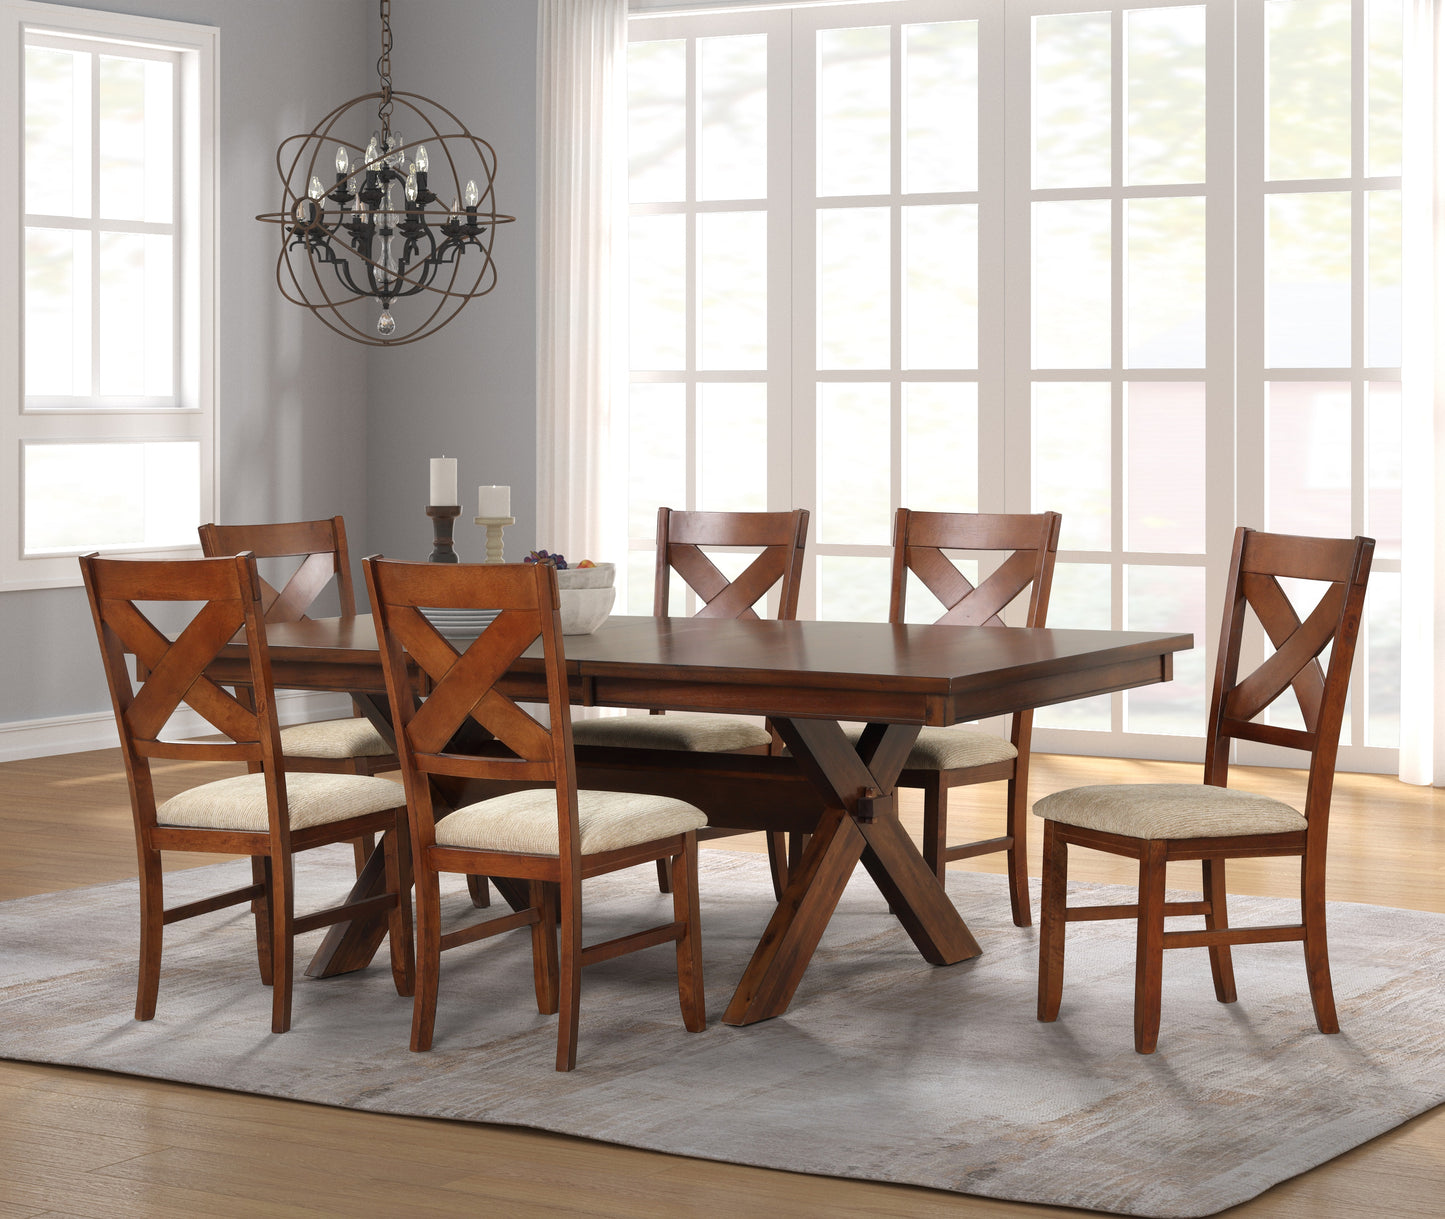 Karven Wood 7-Piece Dining Set, Extendable Trestle Dining Table with 6 Chairs, Dark Hazelnut